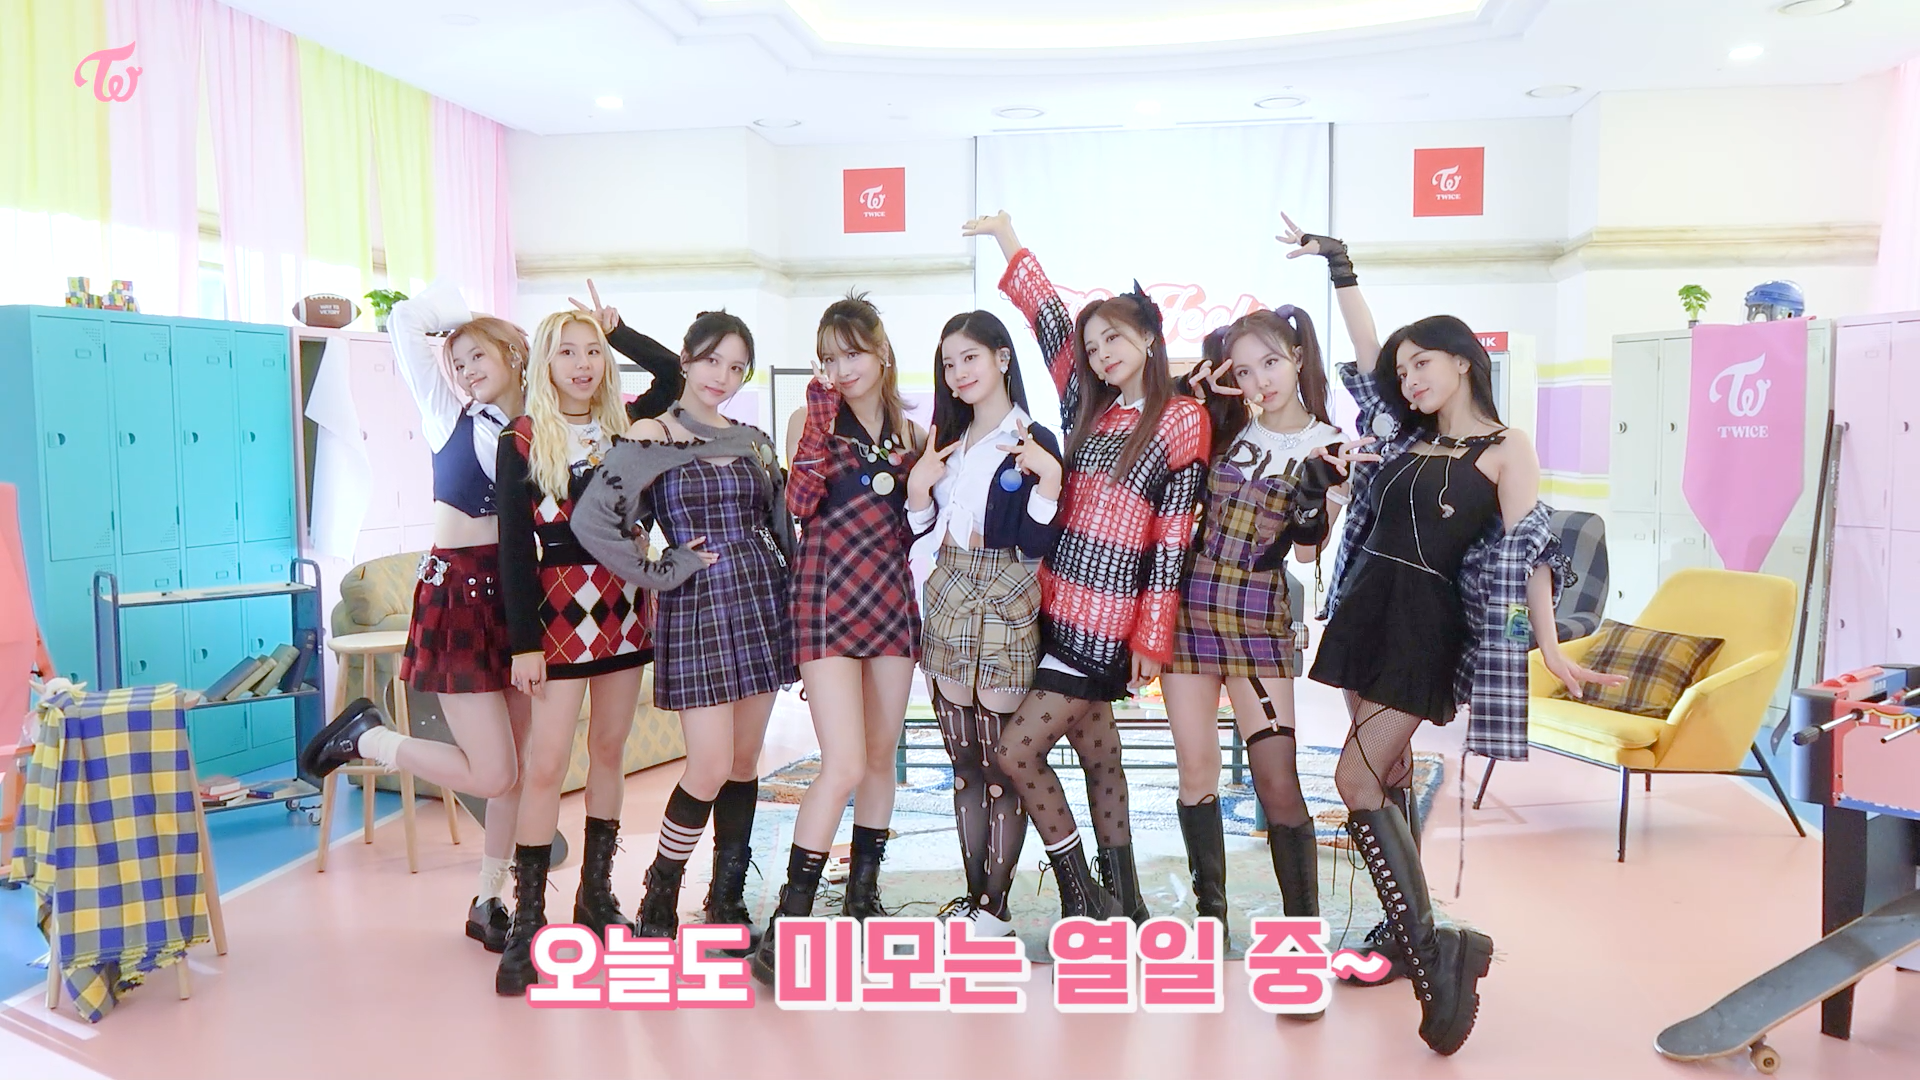 TWICE TV "GMA3: What You Need to Know" Behind the Scenes